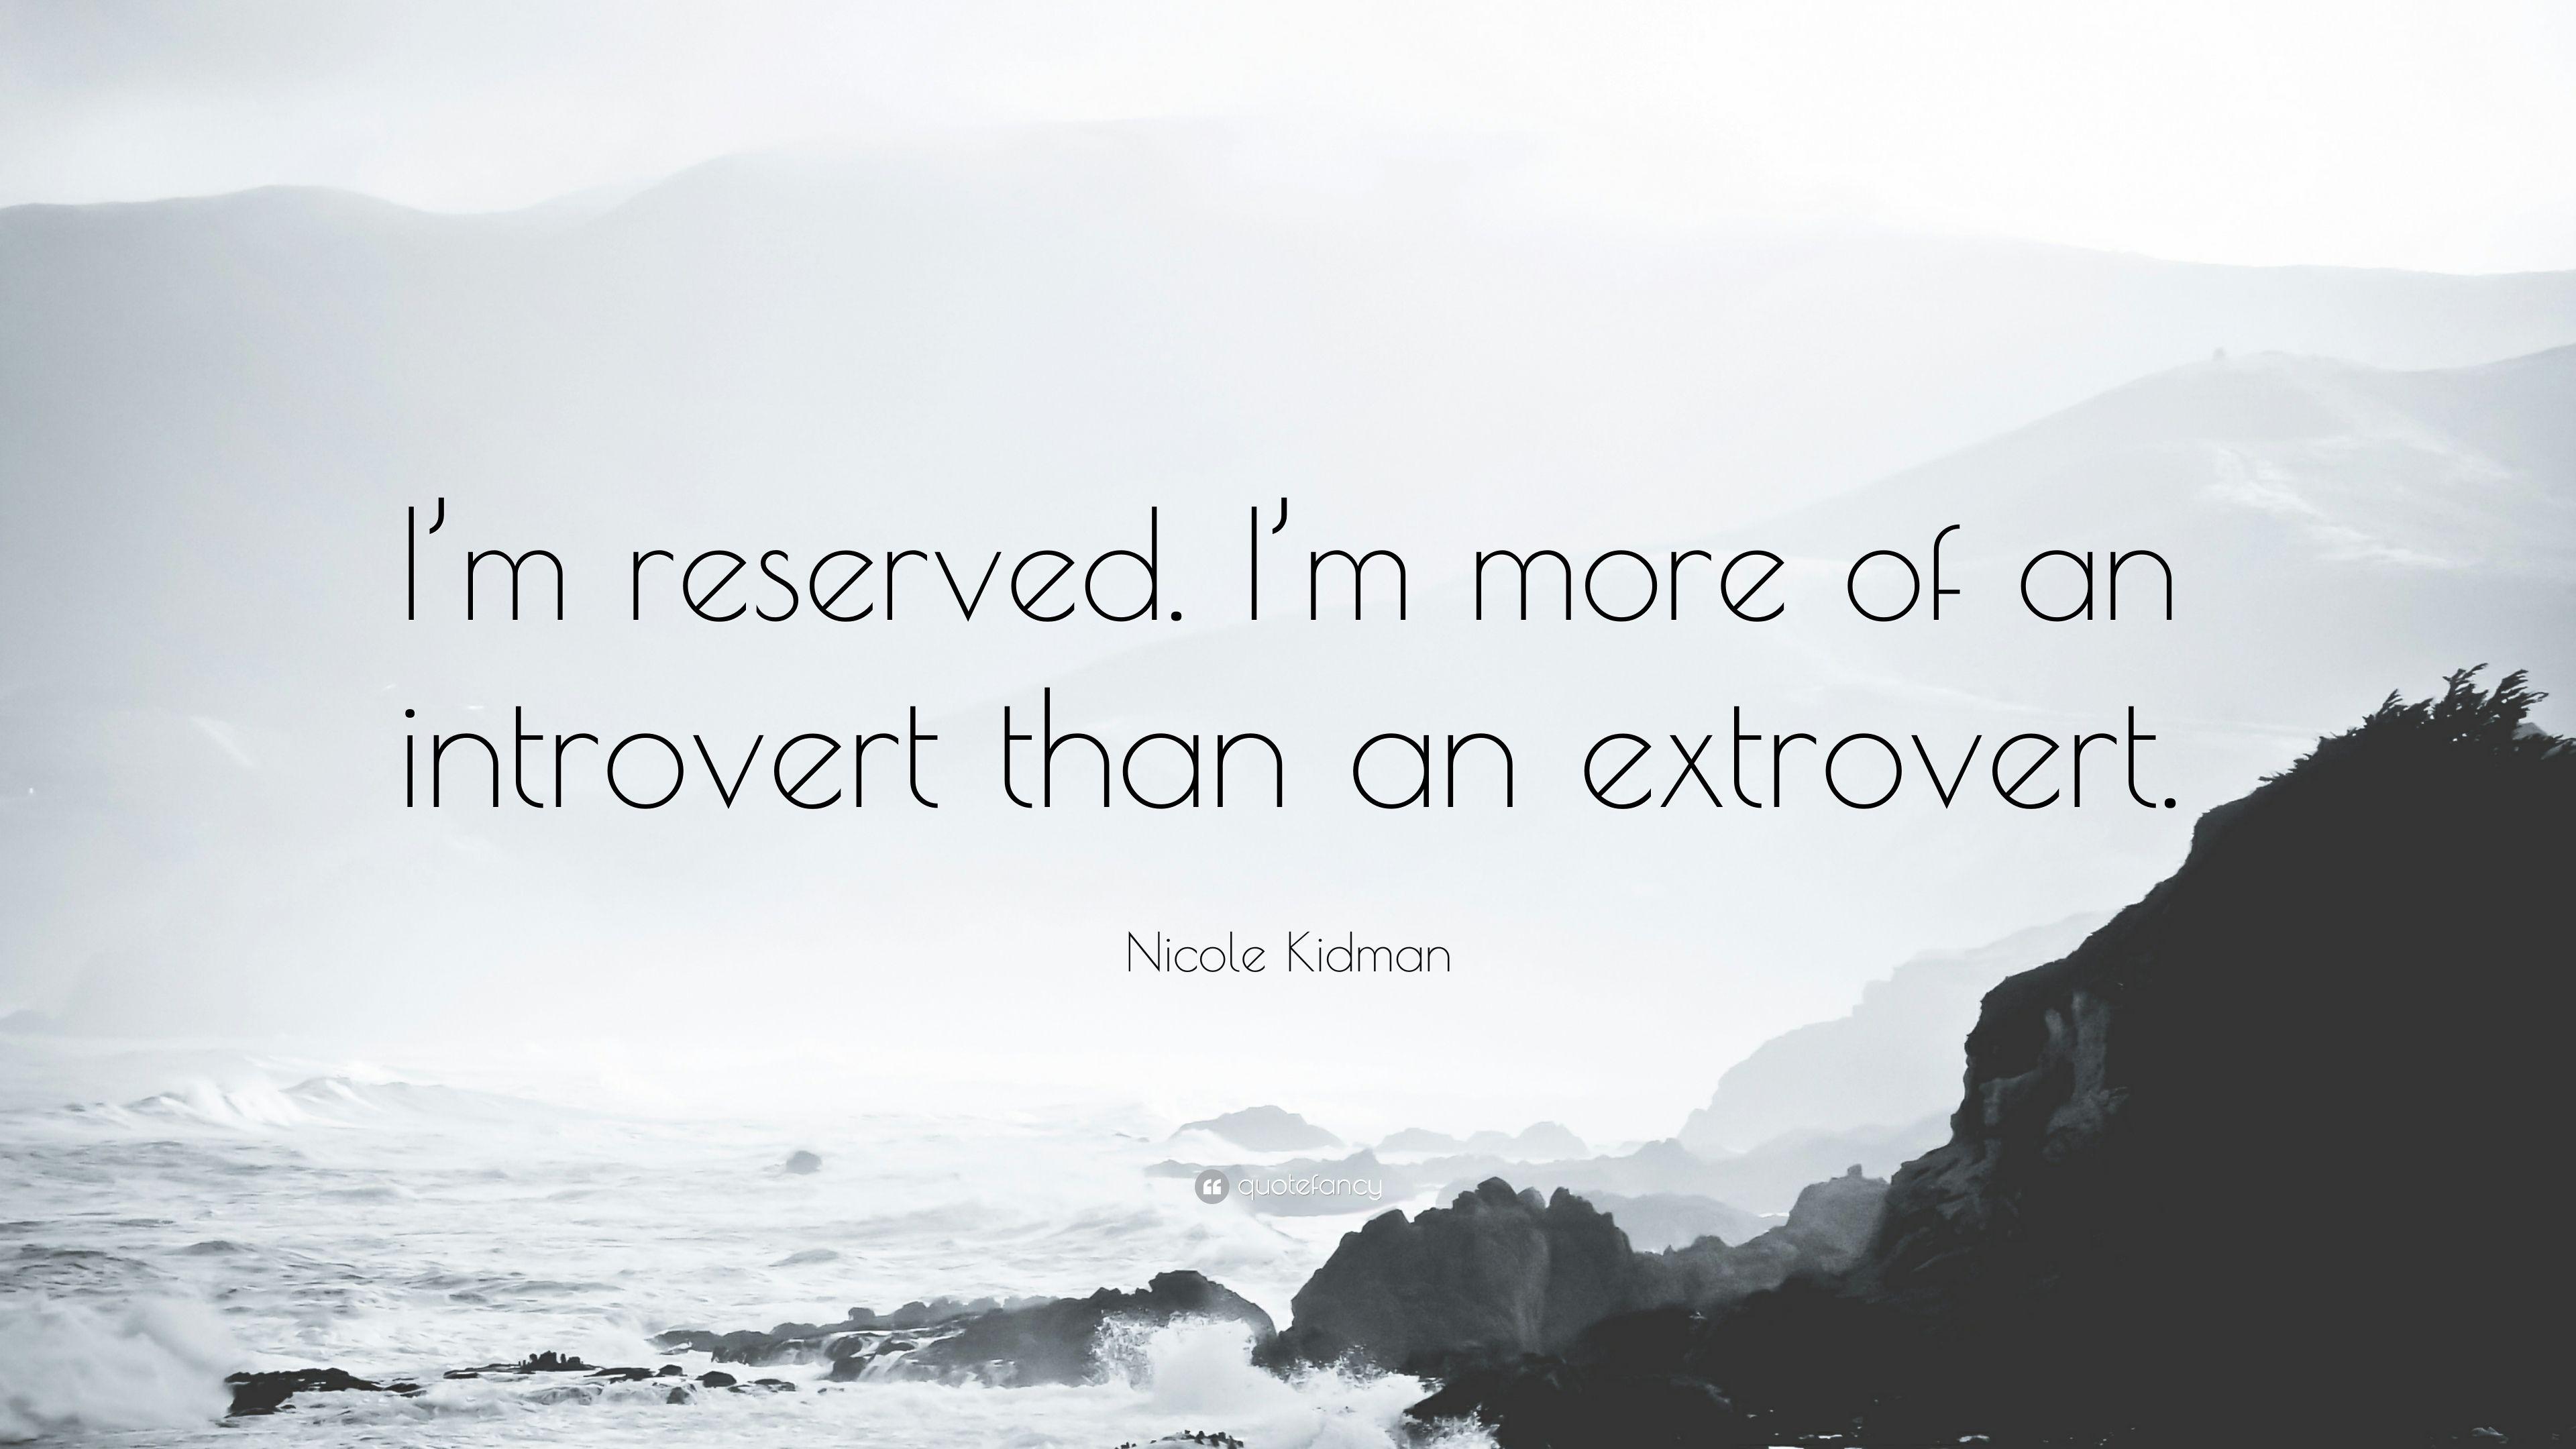 Nicole Kidman Quote: “I'm reserved. I'm more of an introvert than an